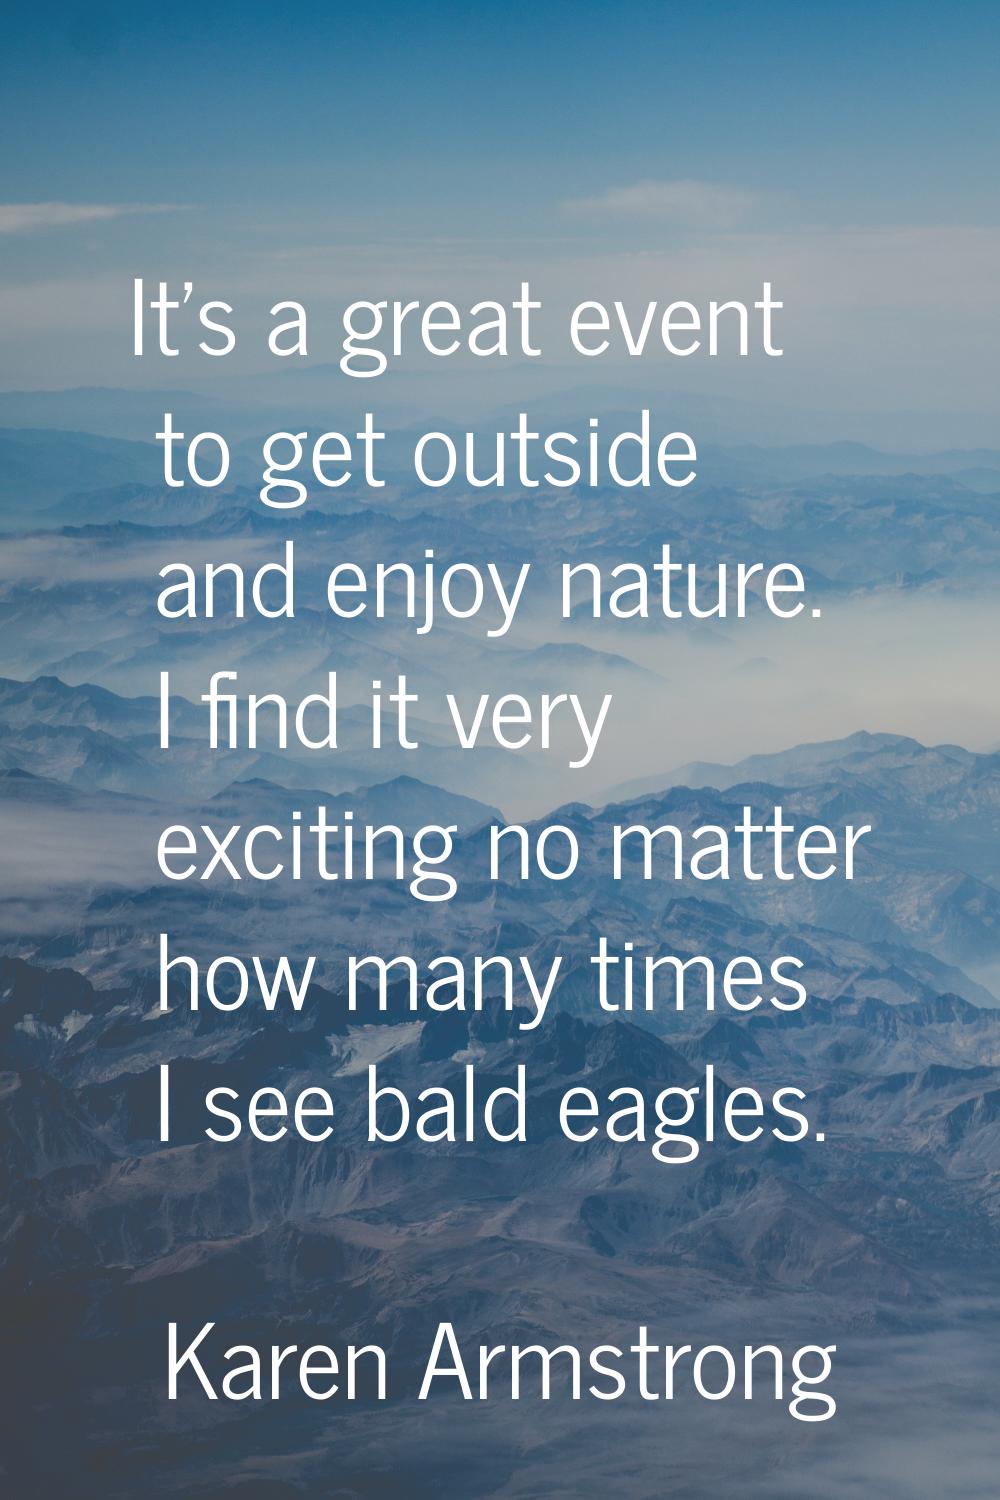 It's a great event to get outside and enjoy nature. I find it very exciting no matter how many time